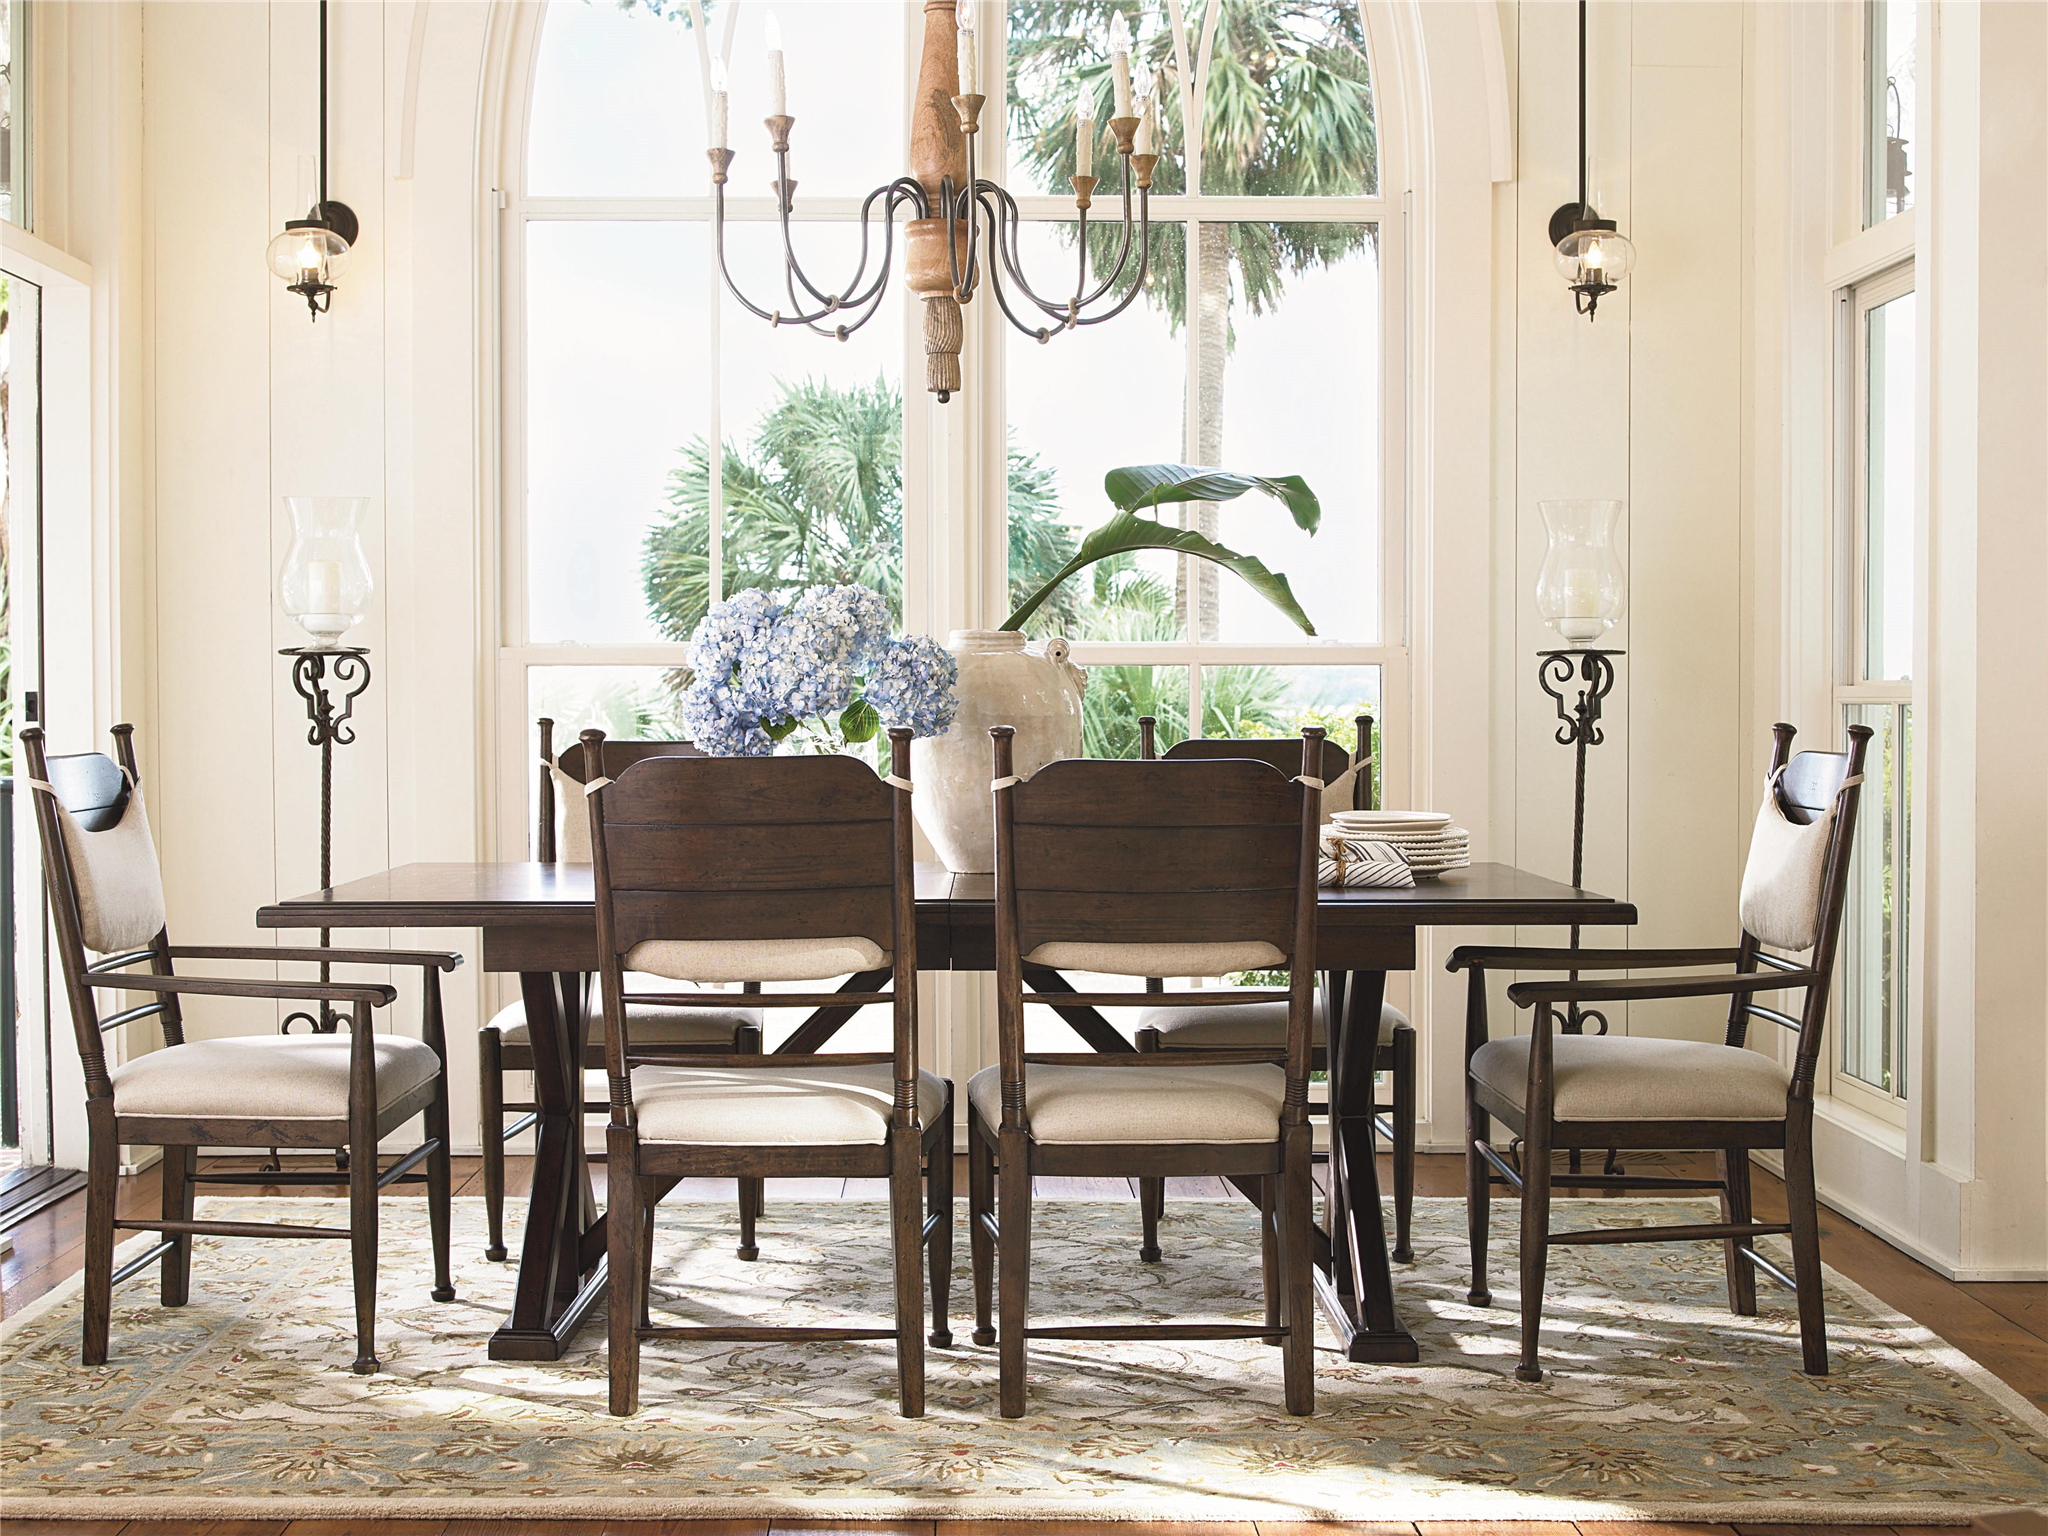 Paula Deen - Dining Room - Family Style Table Collection regarding Paula Deen Dining Room Furniture